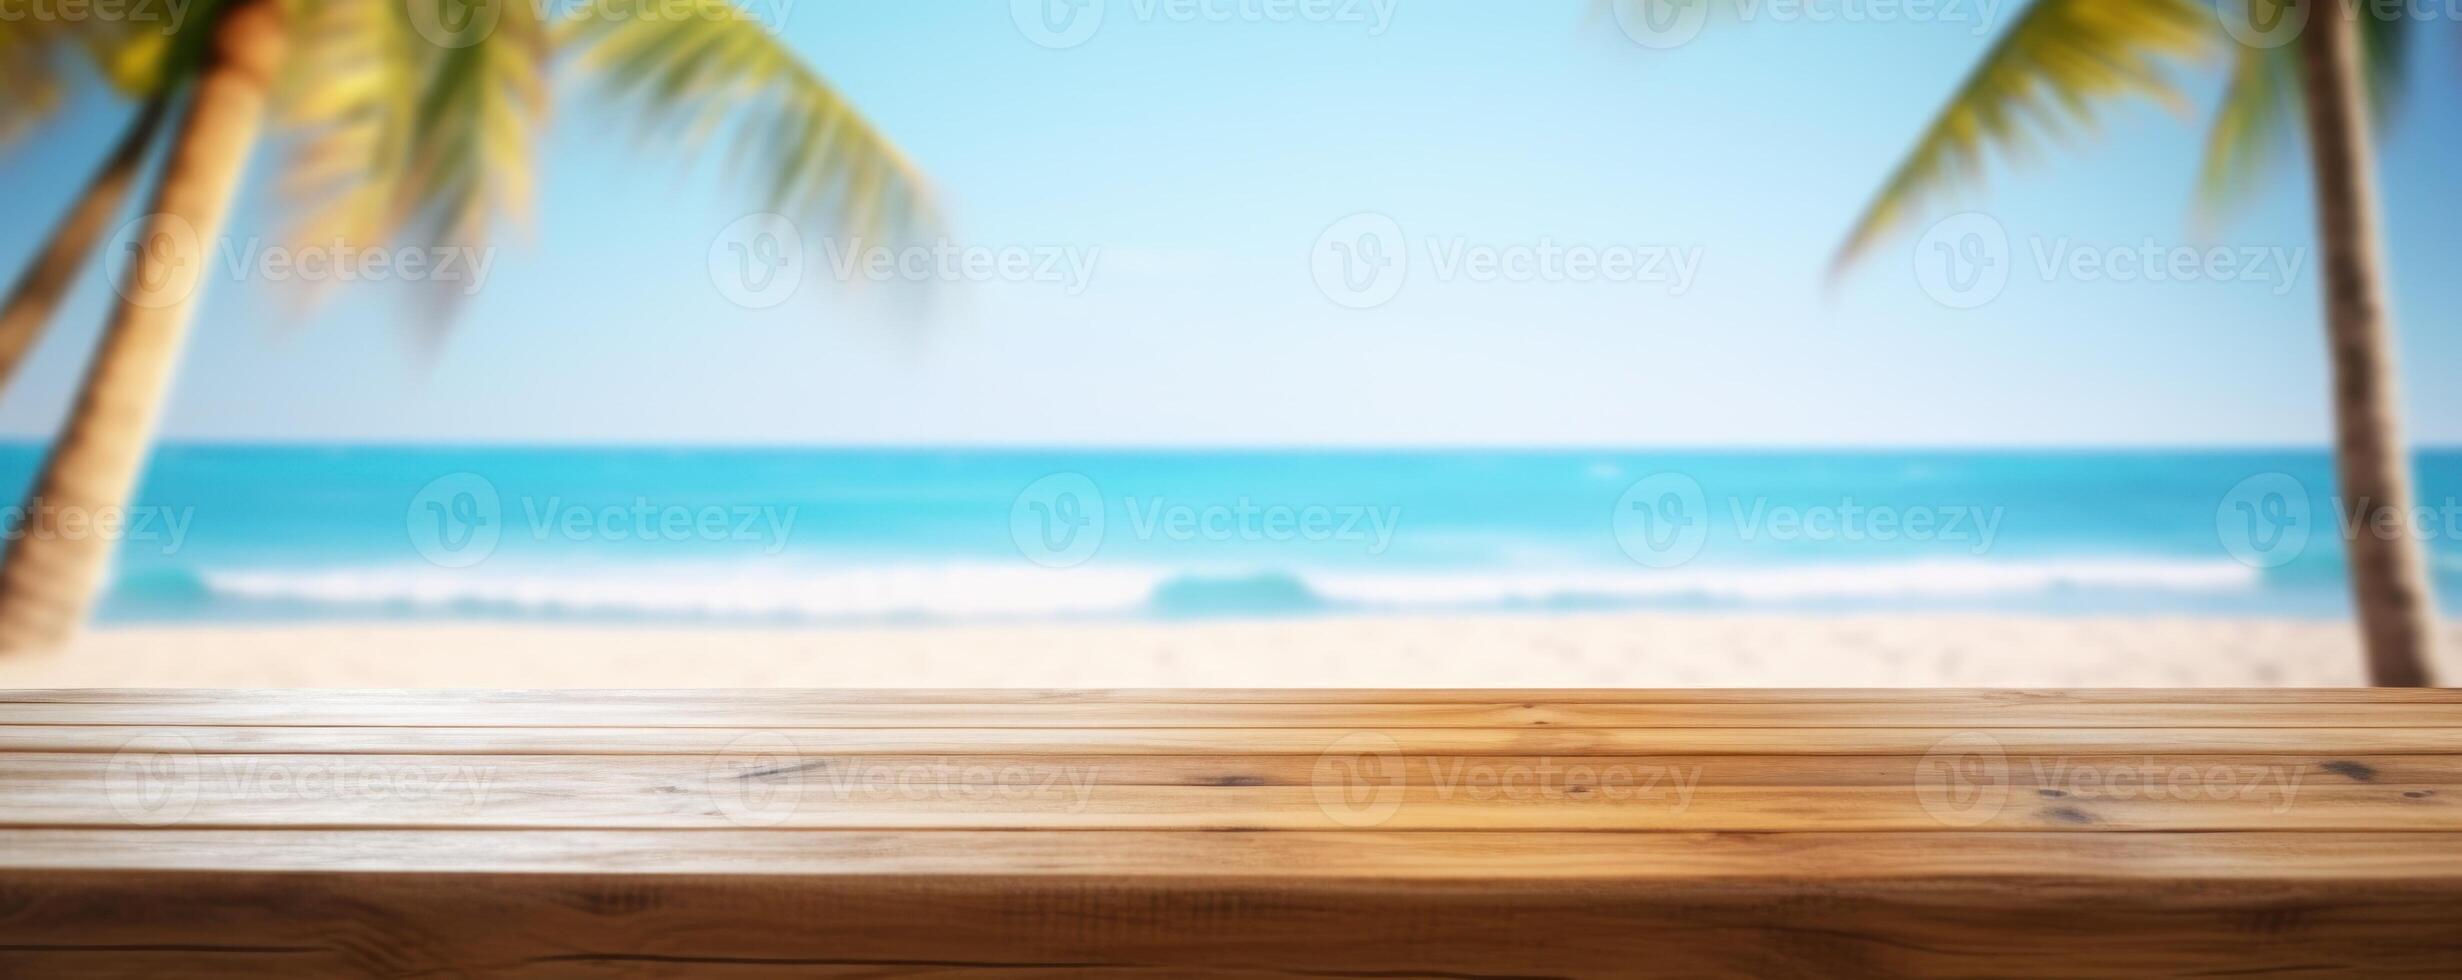 Empty wooden table with tropical sea and beach background. photo